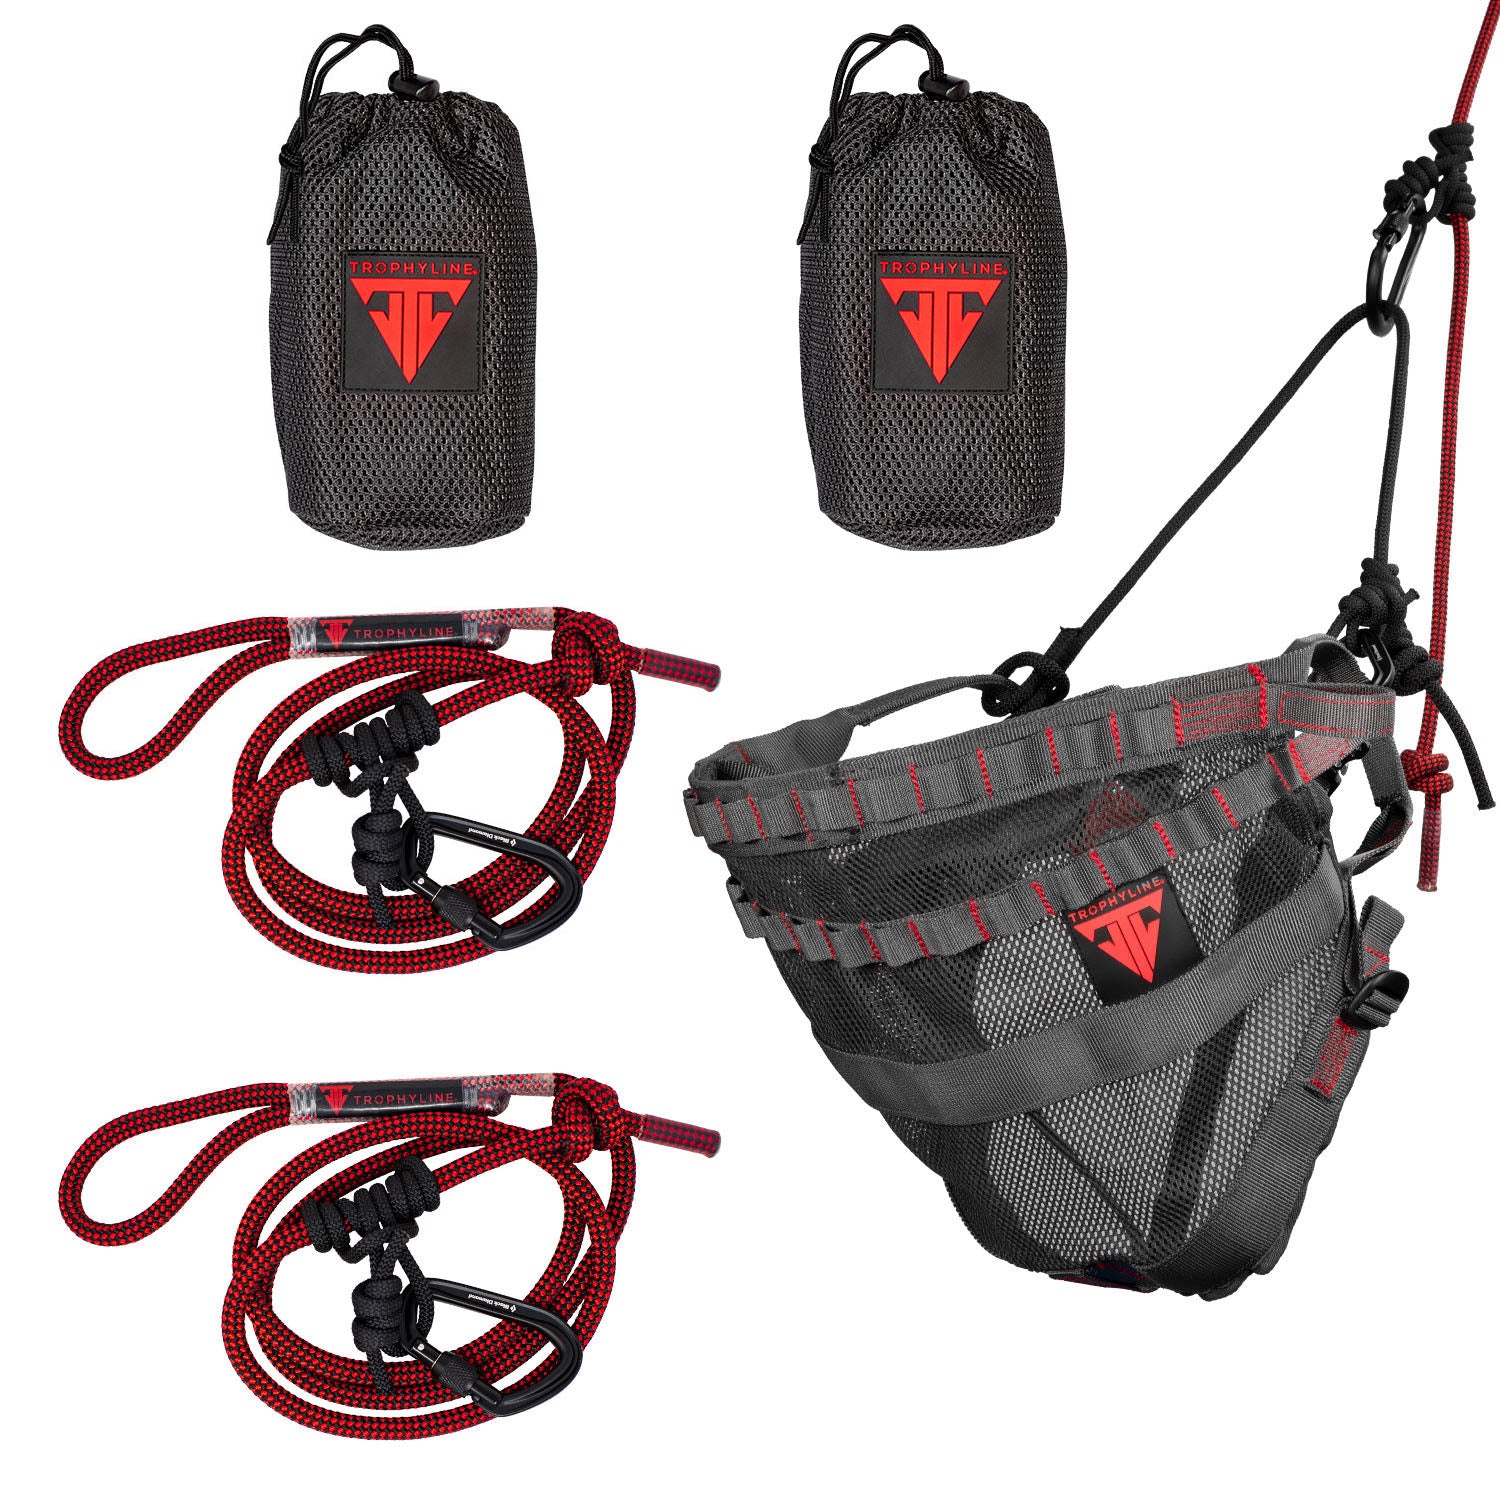 Trophyline Ropes & Carabiners